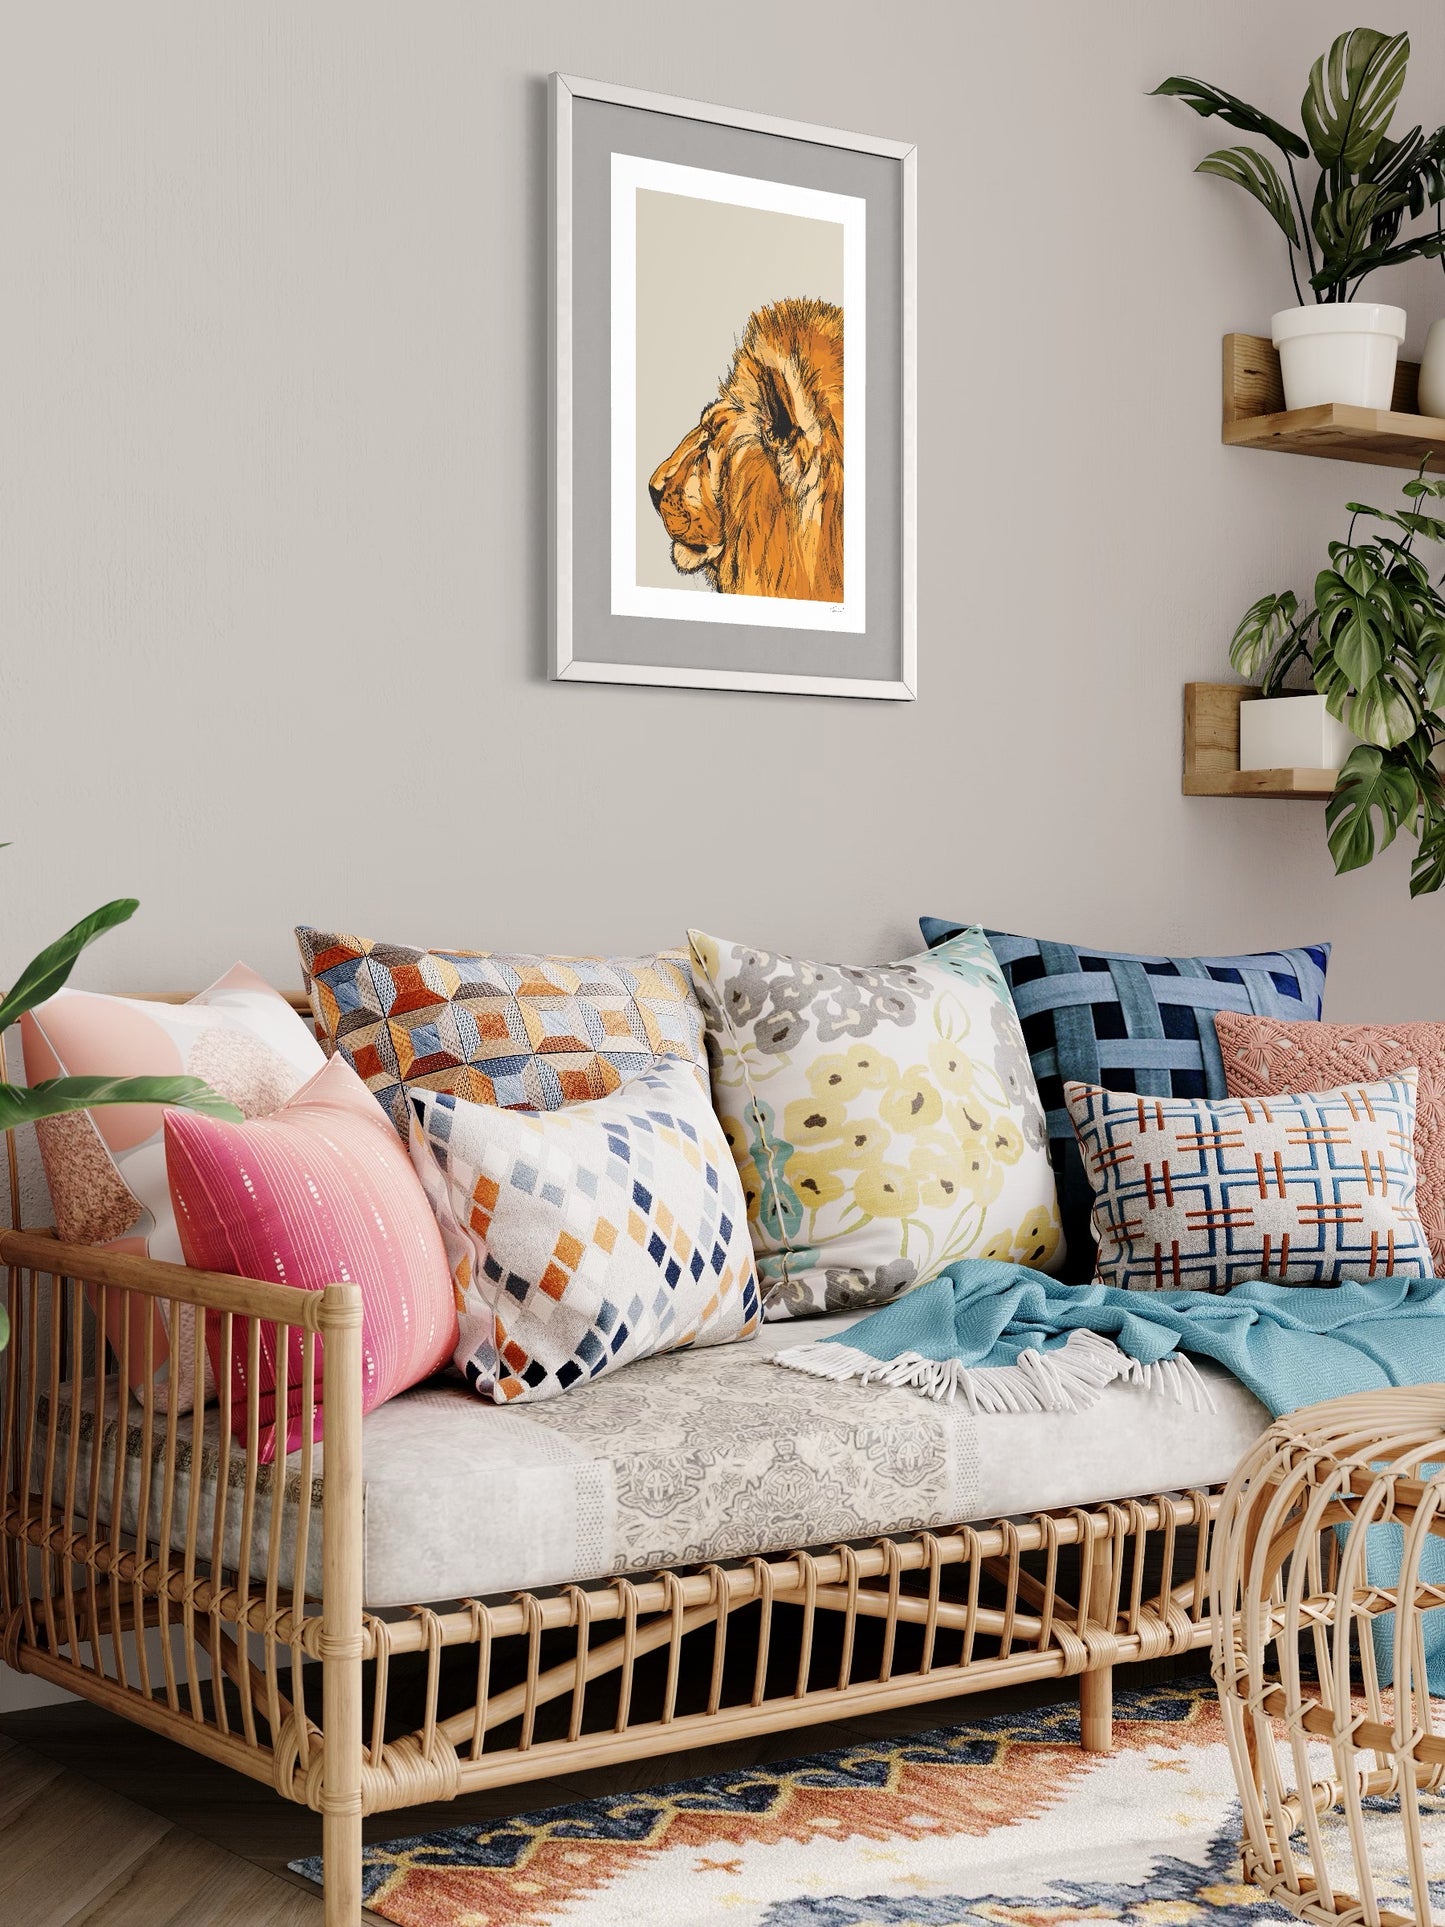 This image shows a giclee wall art print by Tom Laird Illustration of a Lion, framed in a beautiful living room with tasteful modern home decor. This art print is available from Tom Laird Illustration in various sizes.